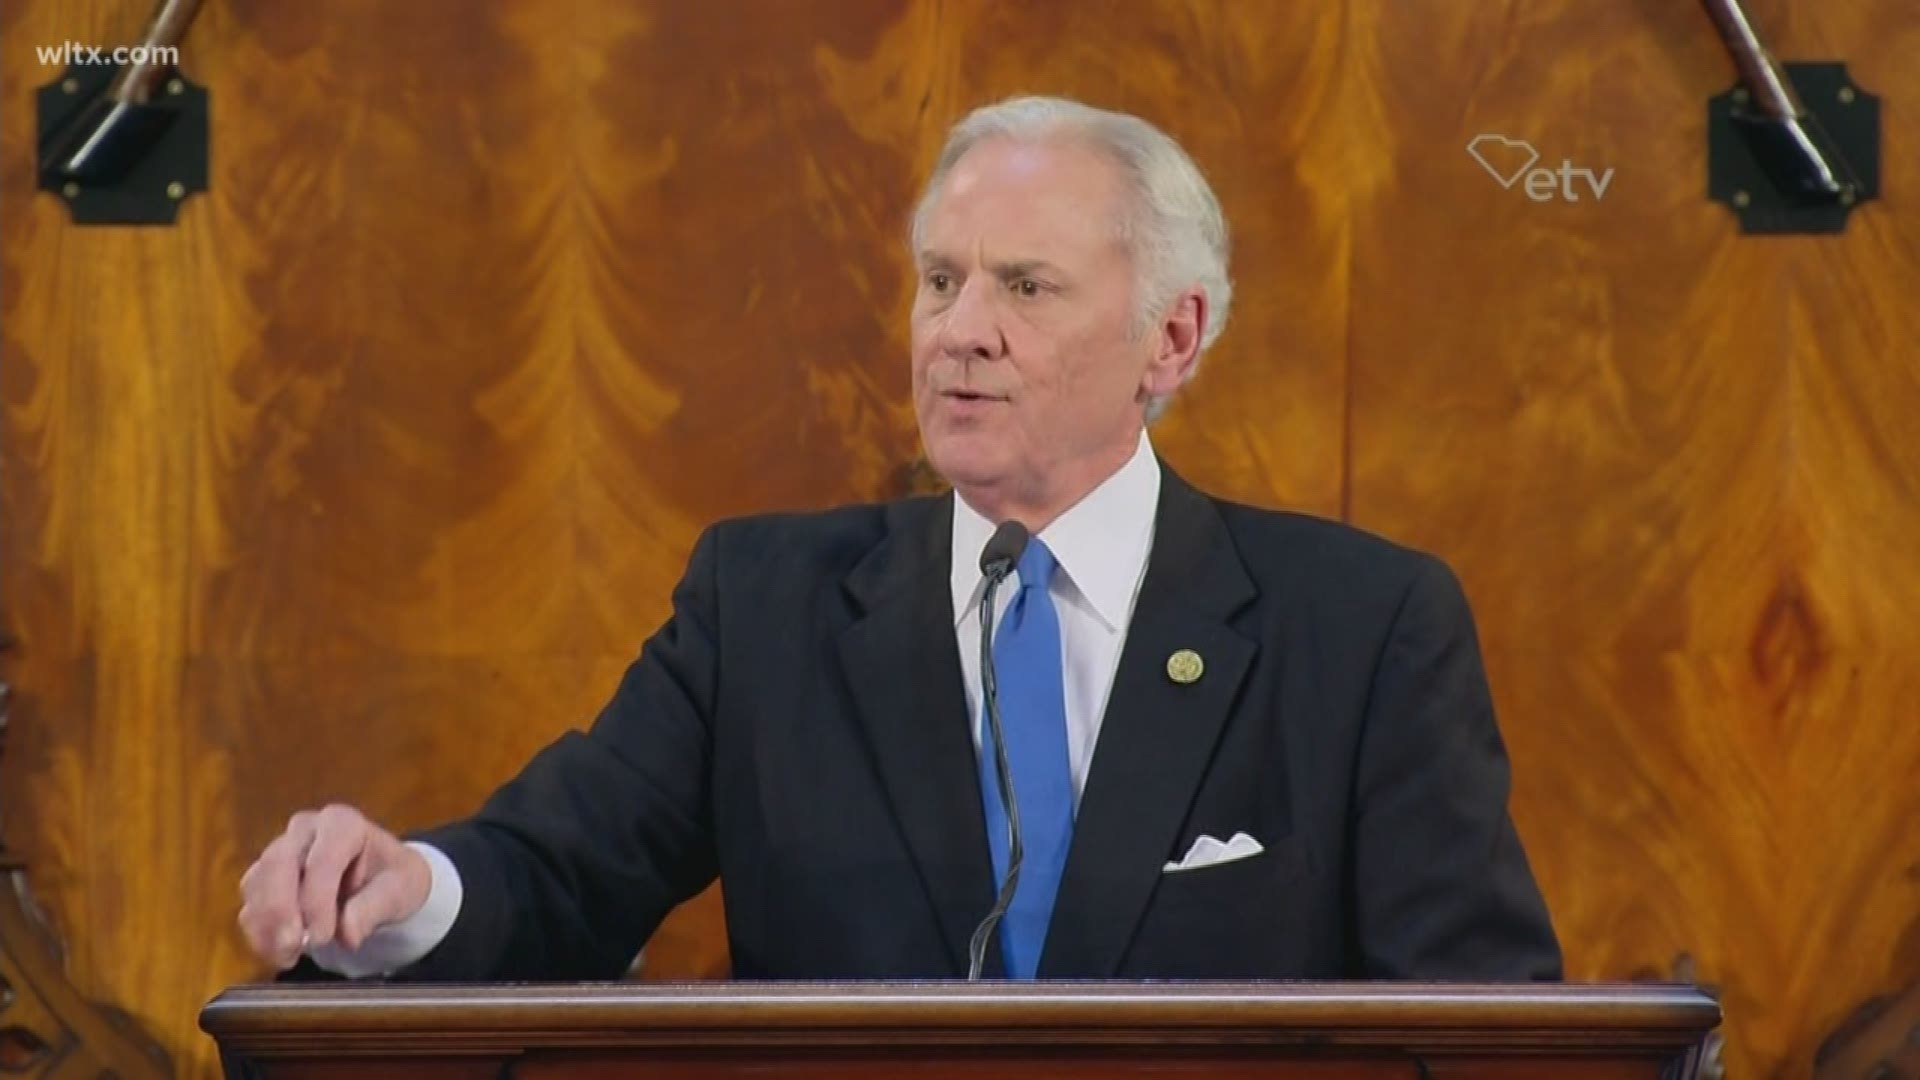 Governor Henry McMaster called for education reform and more economic development in his 2019 State of the State address.